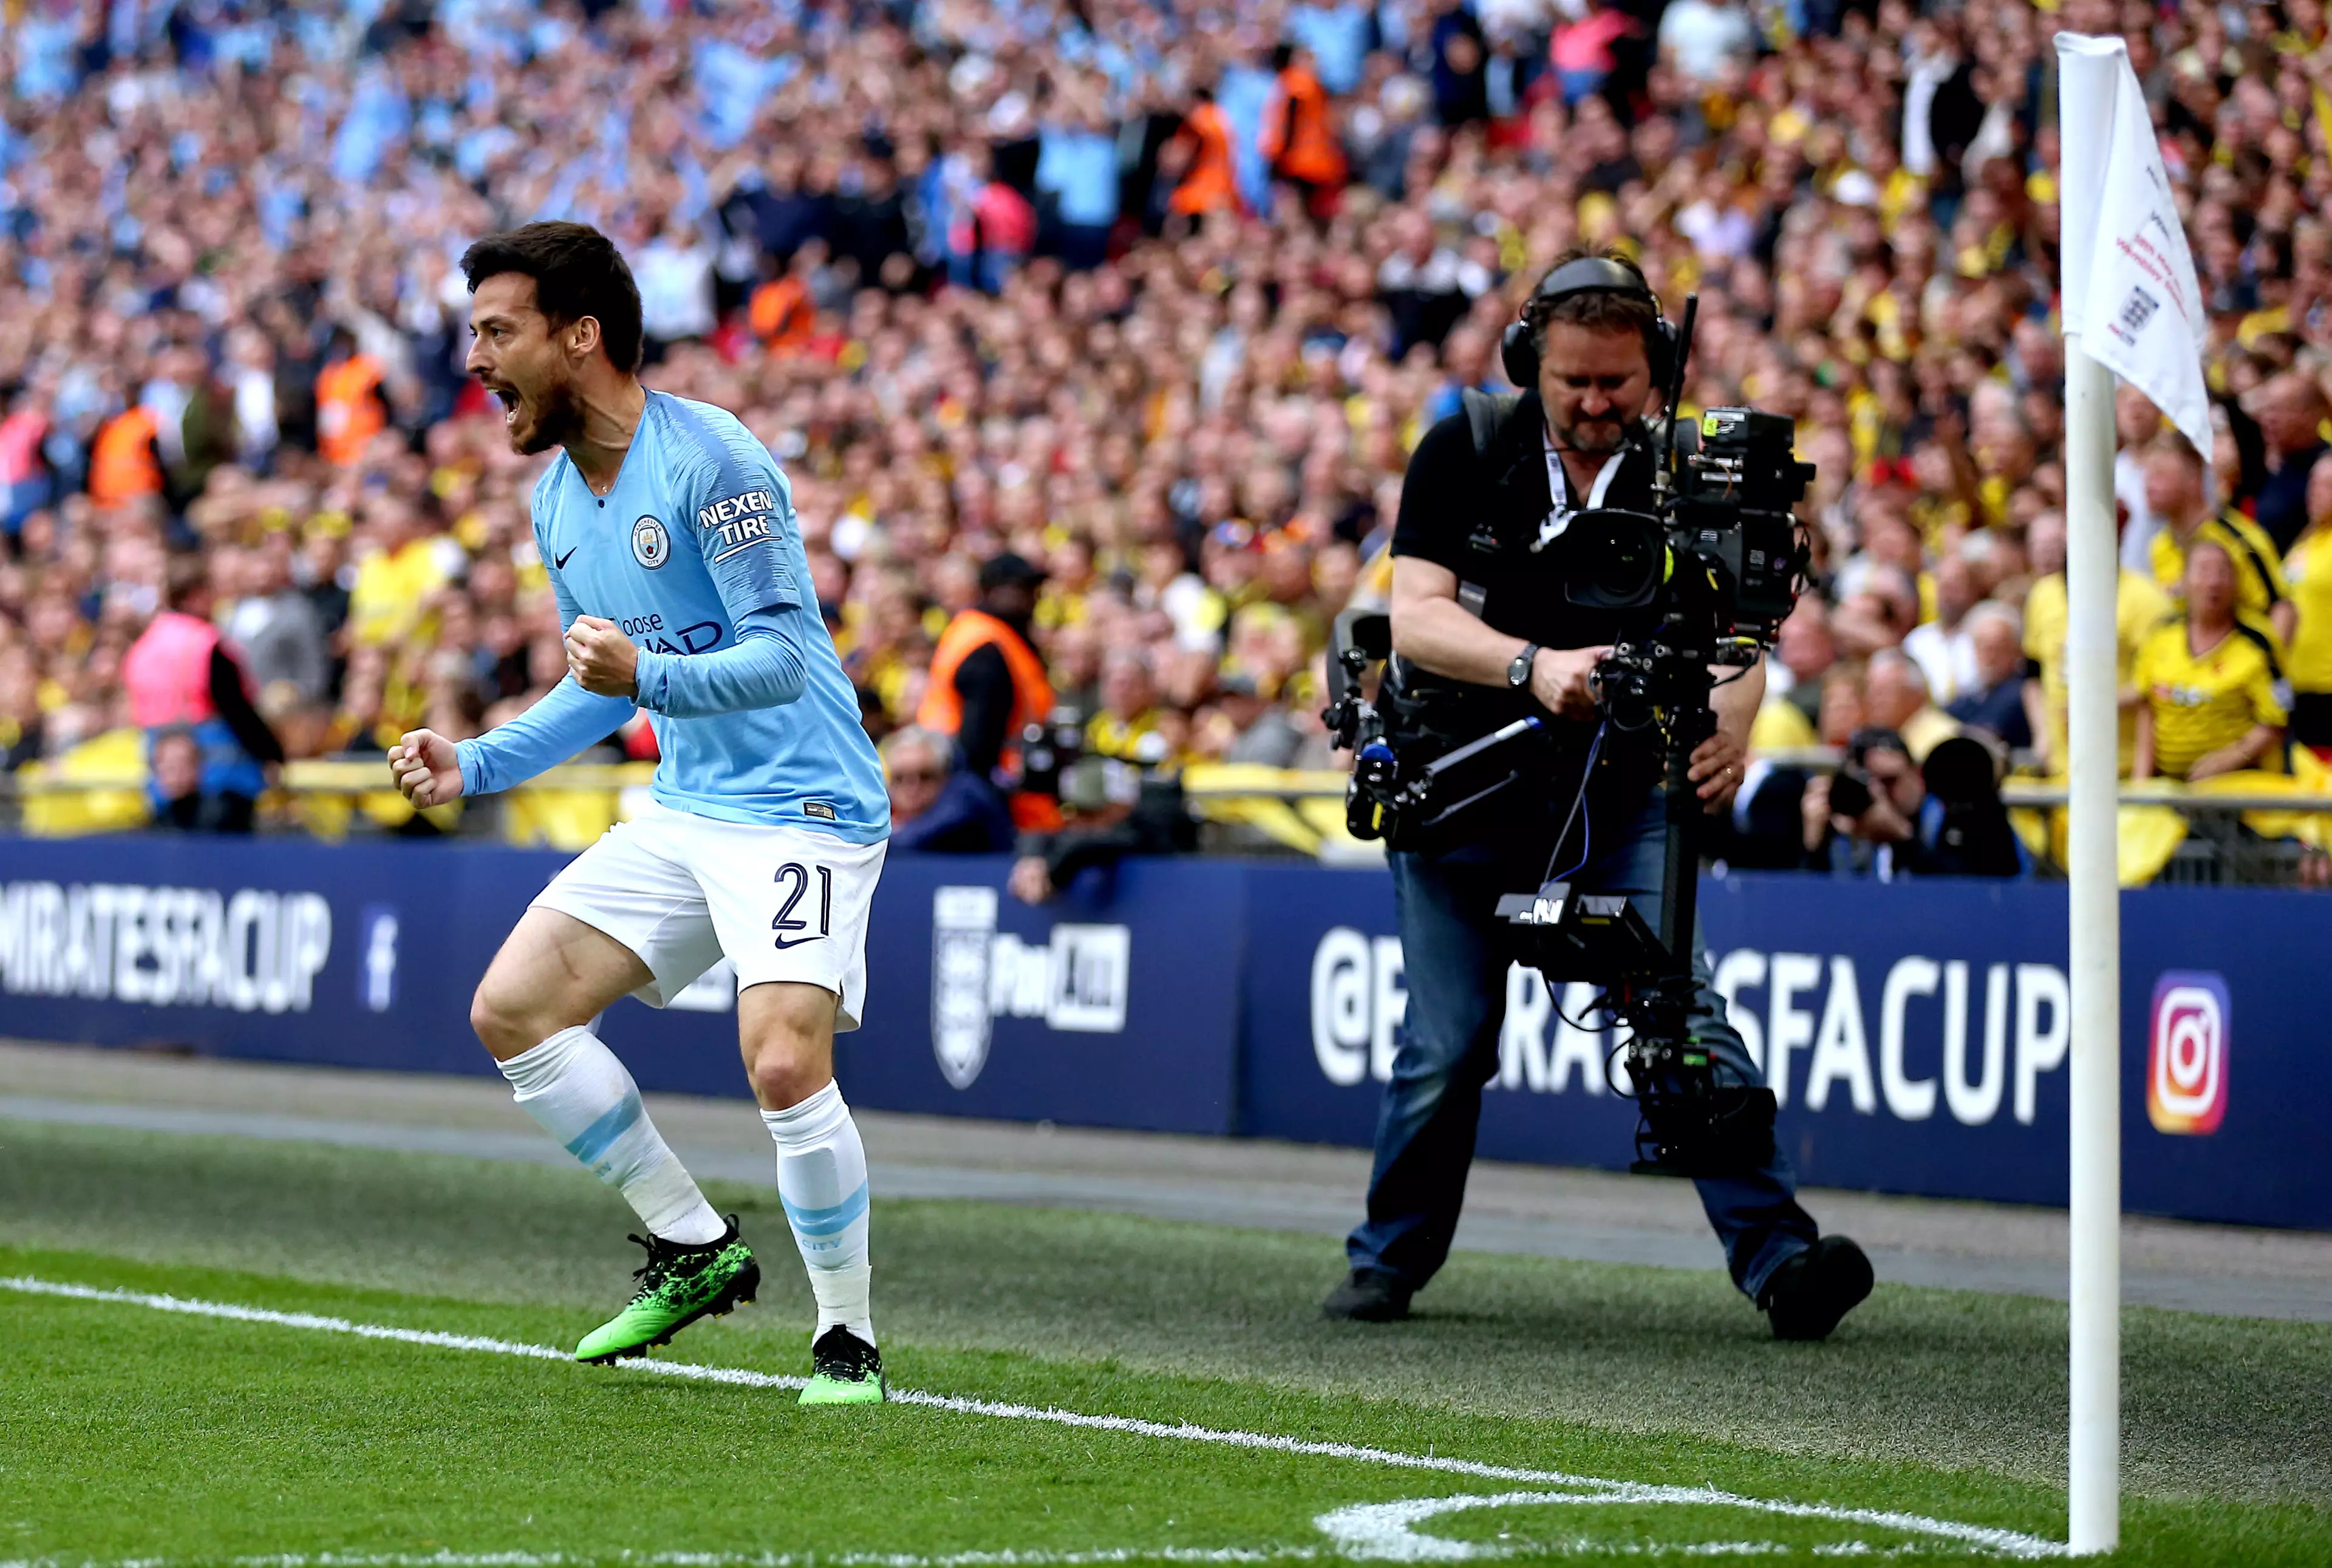 Silva celebrates scoring in the FA Cup final. Image: PA Images